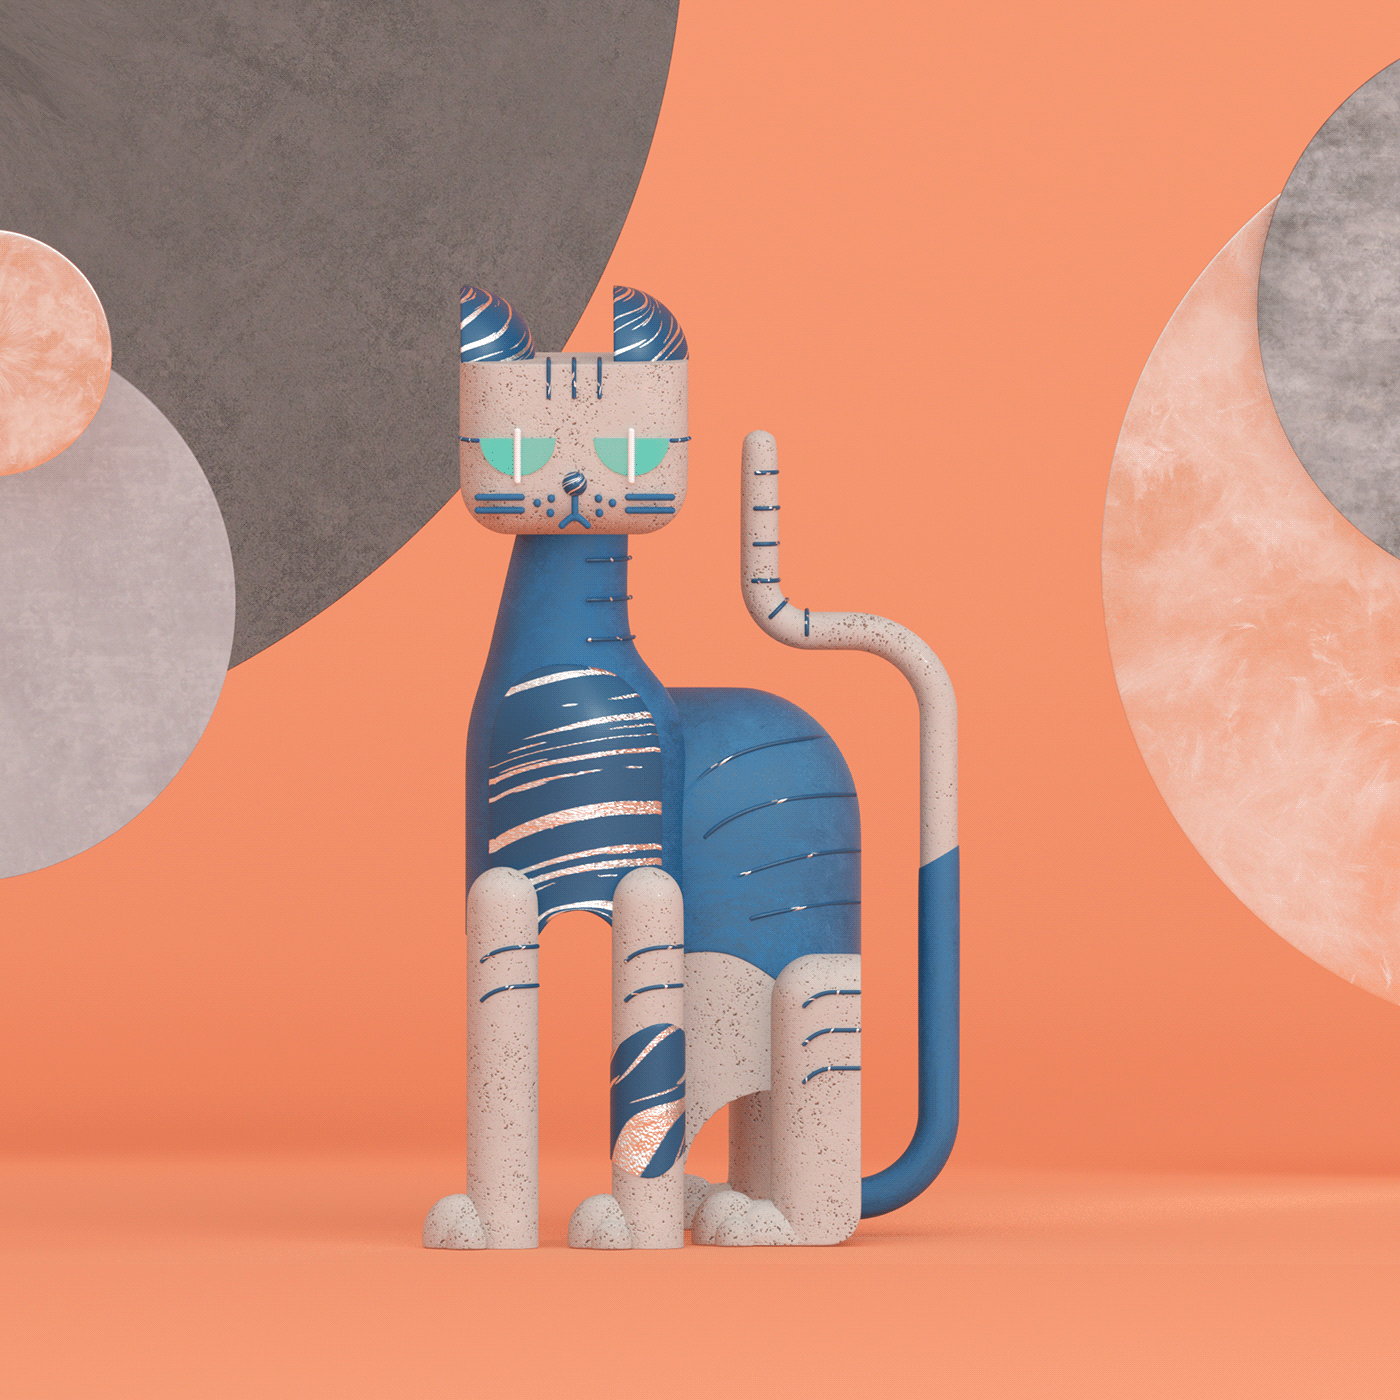 Modern Toy Cats on Behance890d4792348393.5e49757dc7556.png